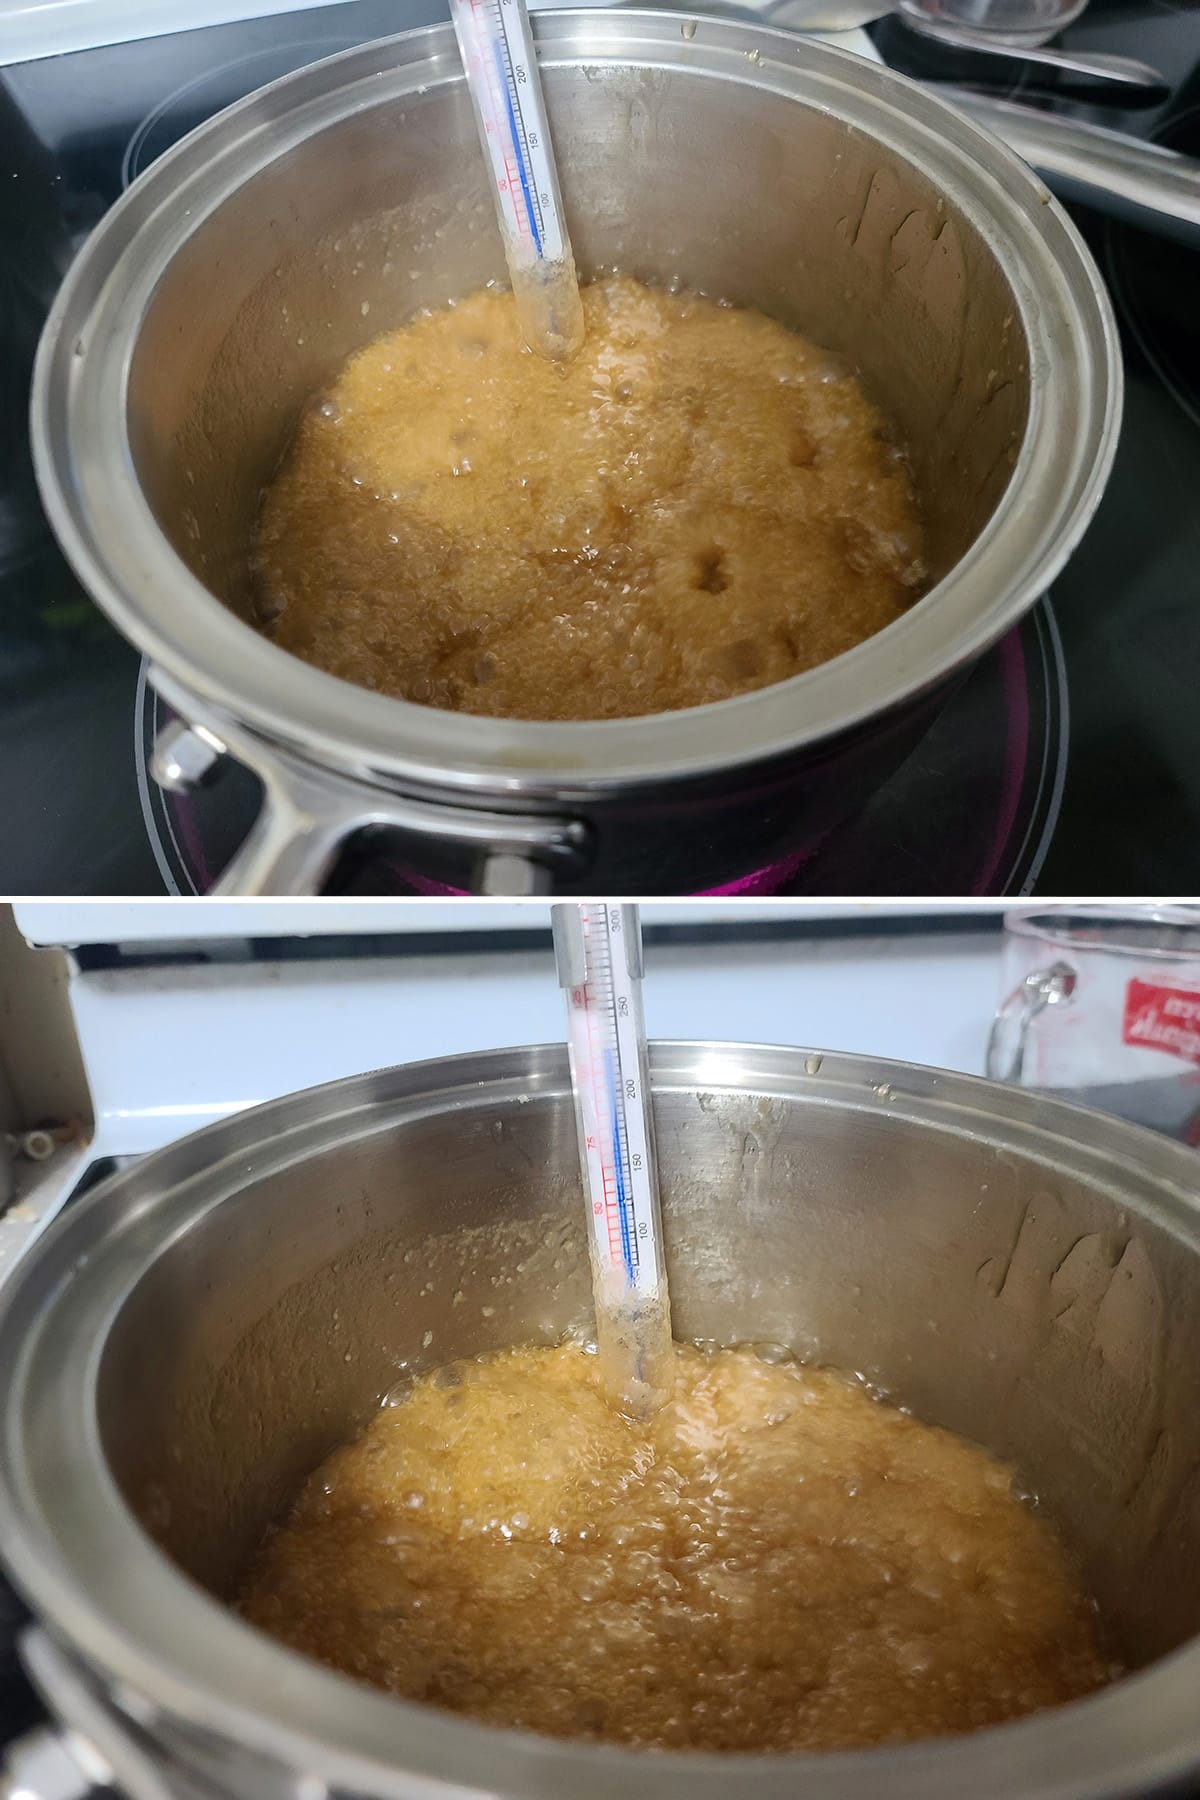 A 2 part image showing the boiling maple syrup caramel, with a candy thermometer affixed to the pot.